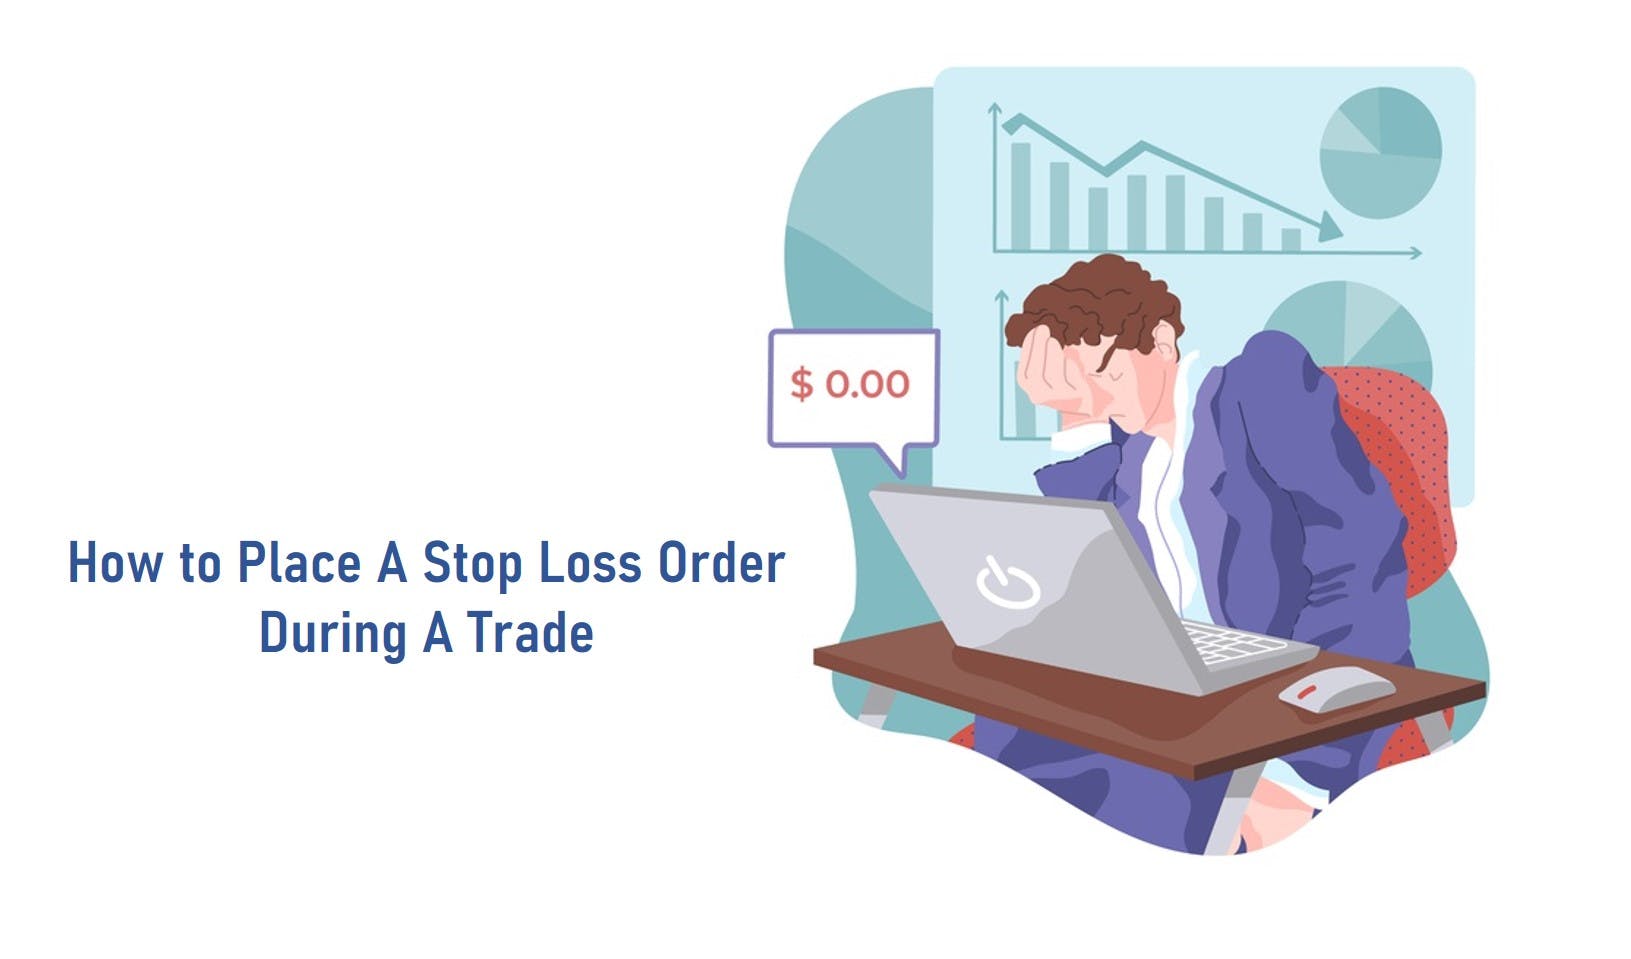 How to Place A Stop Loss Order During A Trade